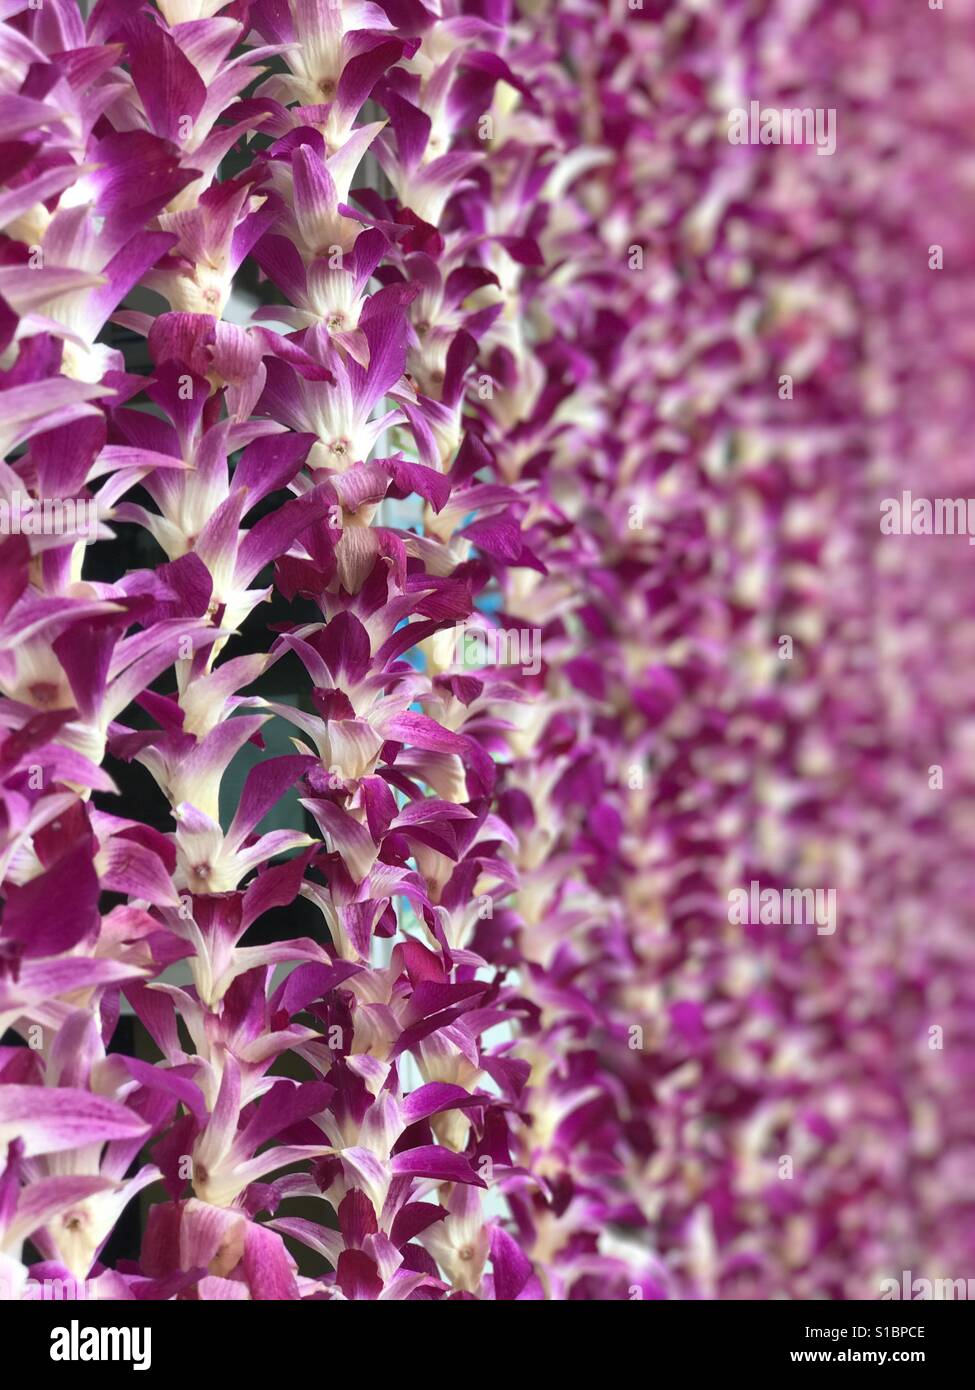 Curtains made of pink Thai orchid flowers Stock Photo